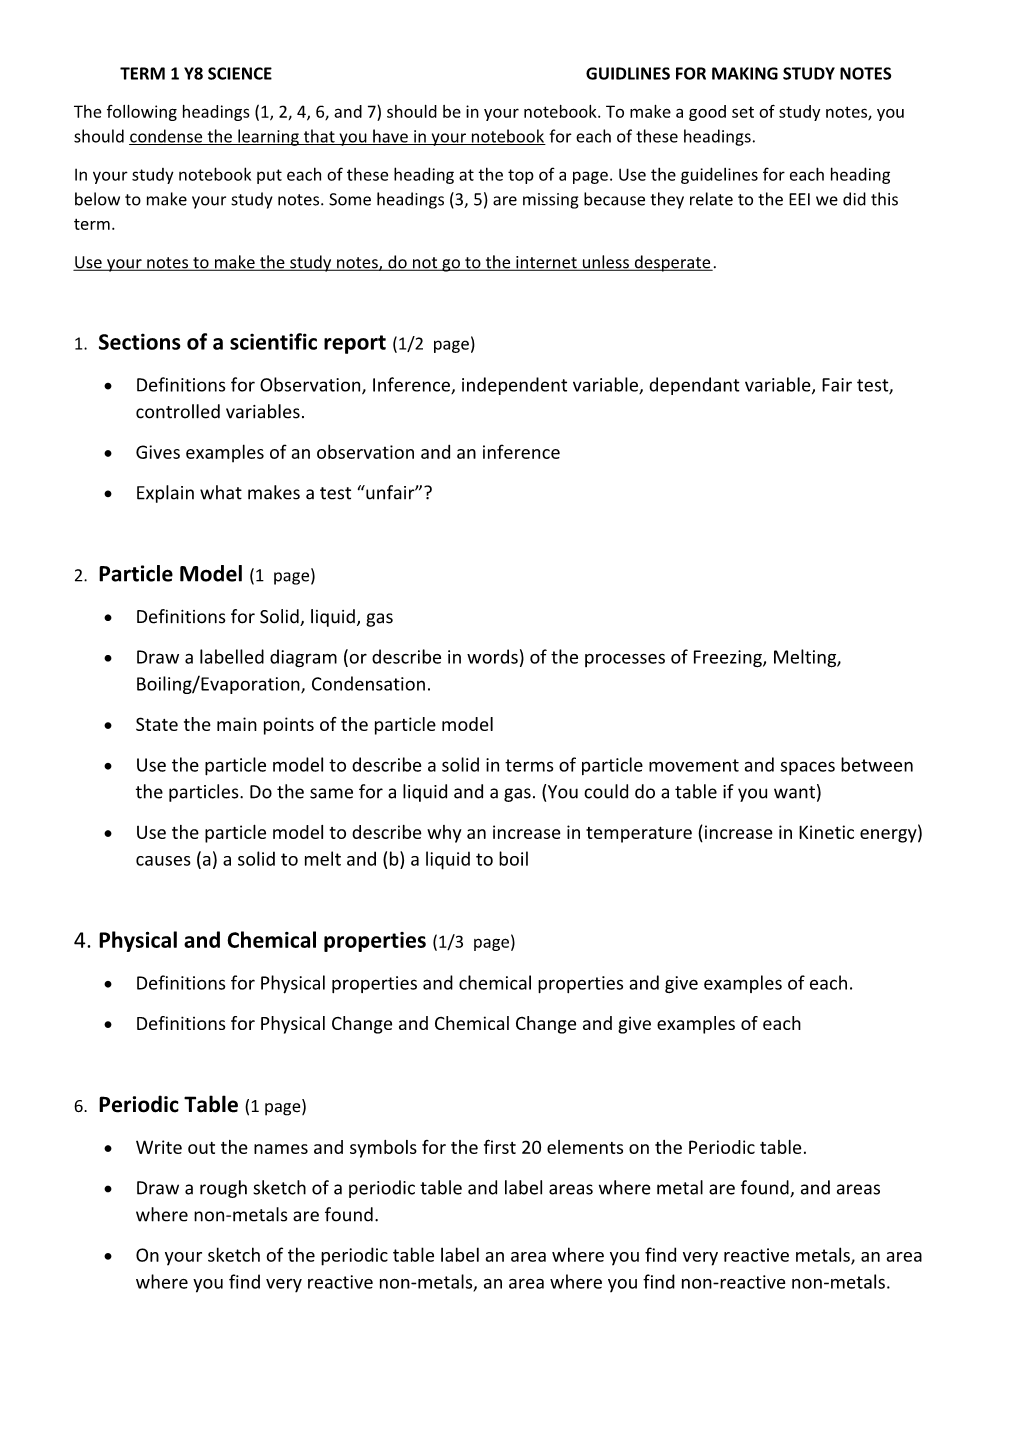 Term 1 Y8 Science Guidlines for Making Study Notes